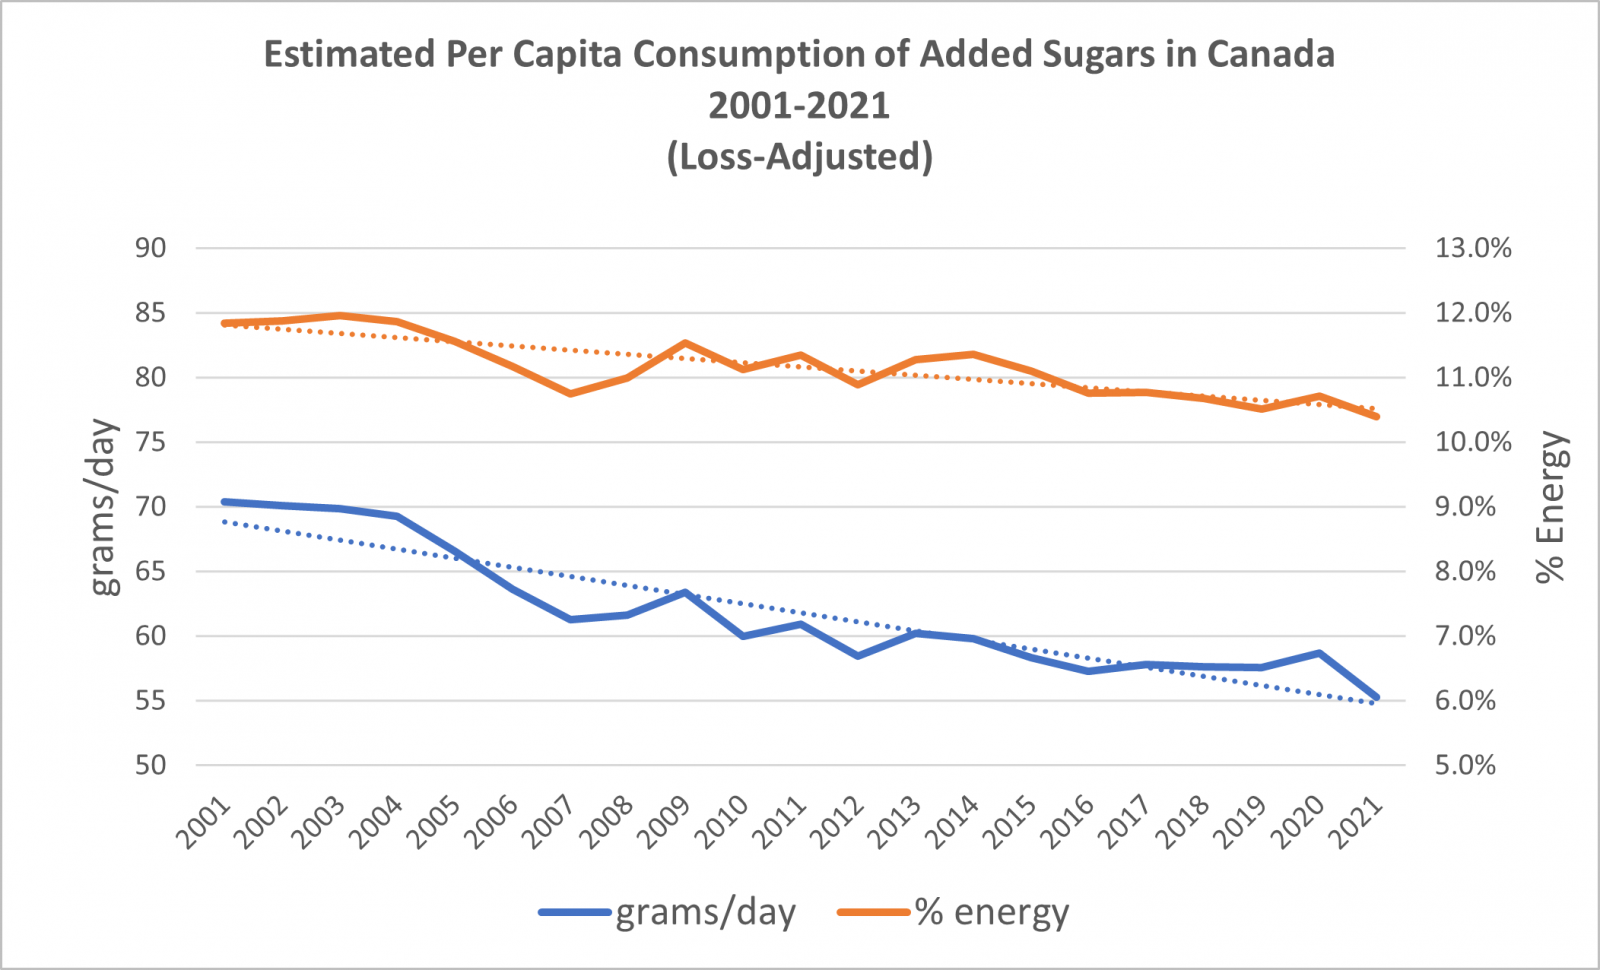 Estimated per capita consumption of added sugars in Canada has declined over the past 20 years